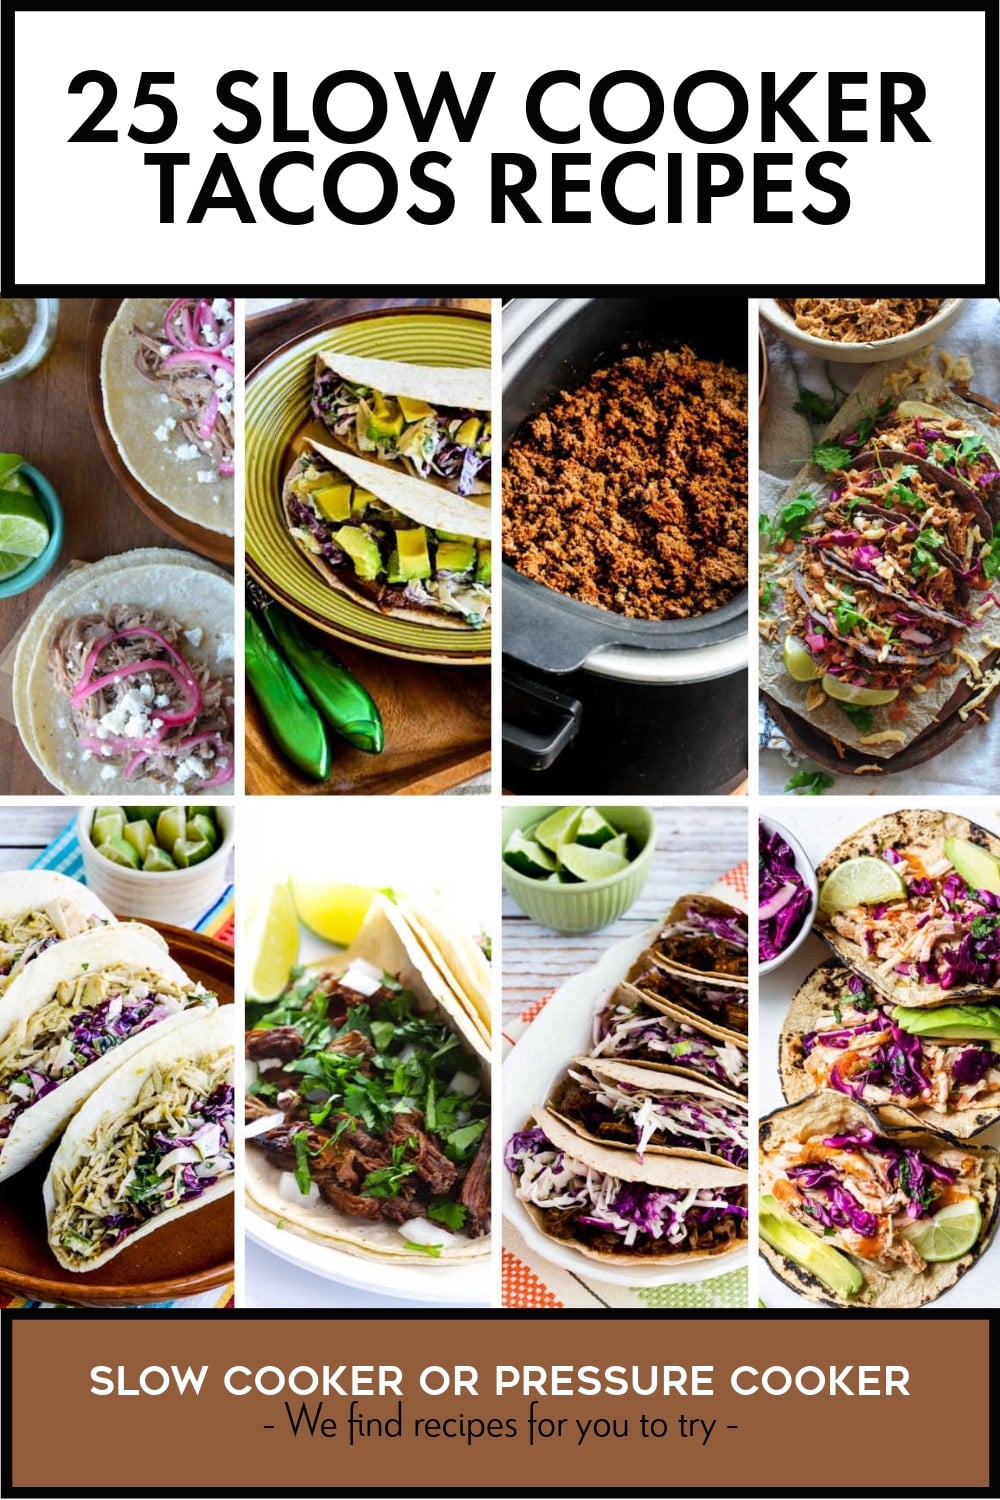 Pinterest image of 25 Slow Cooker Tacos Recipes